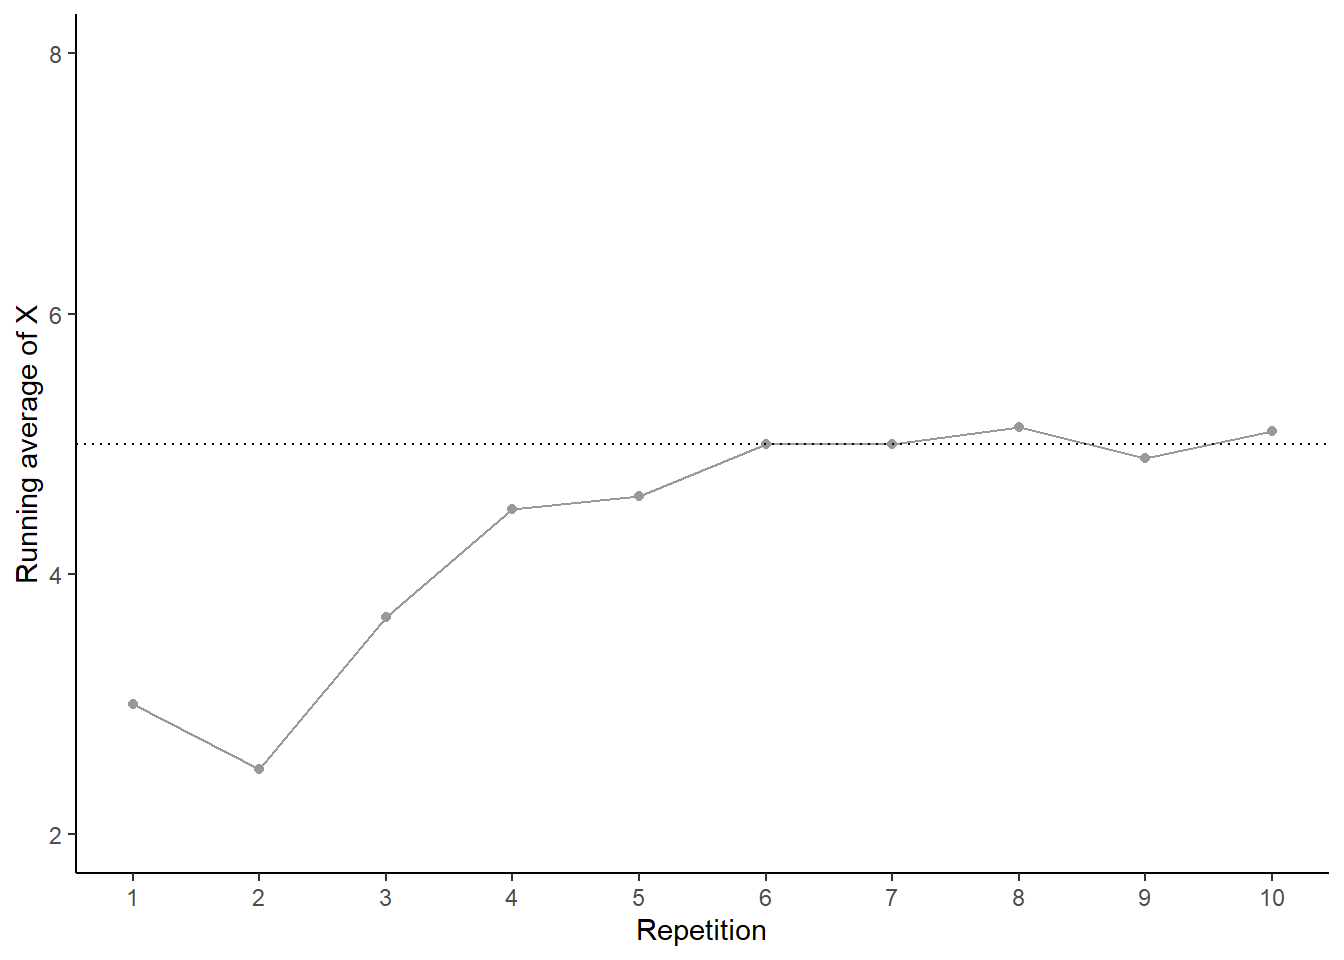 Running average of \(X\) for the 10 pairs of rolls in Table 2.24.